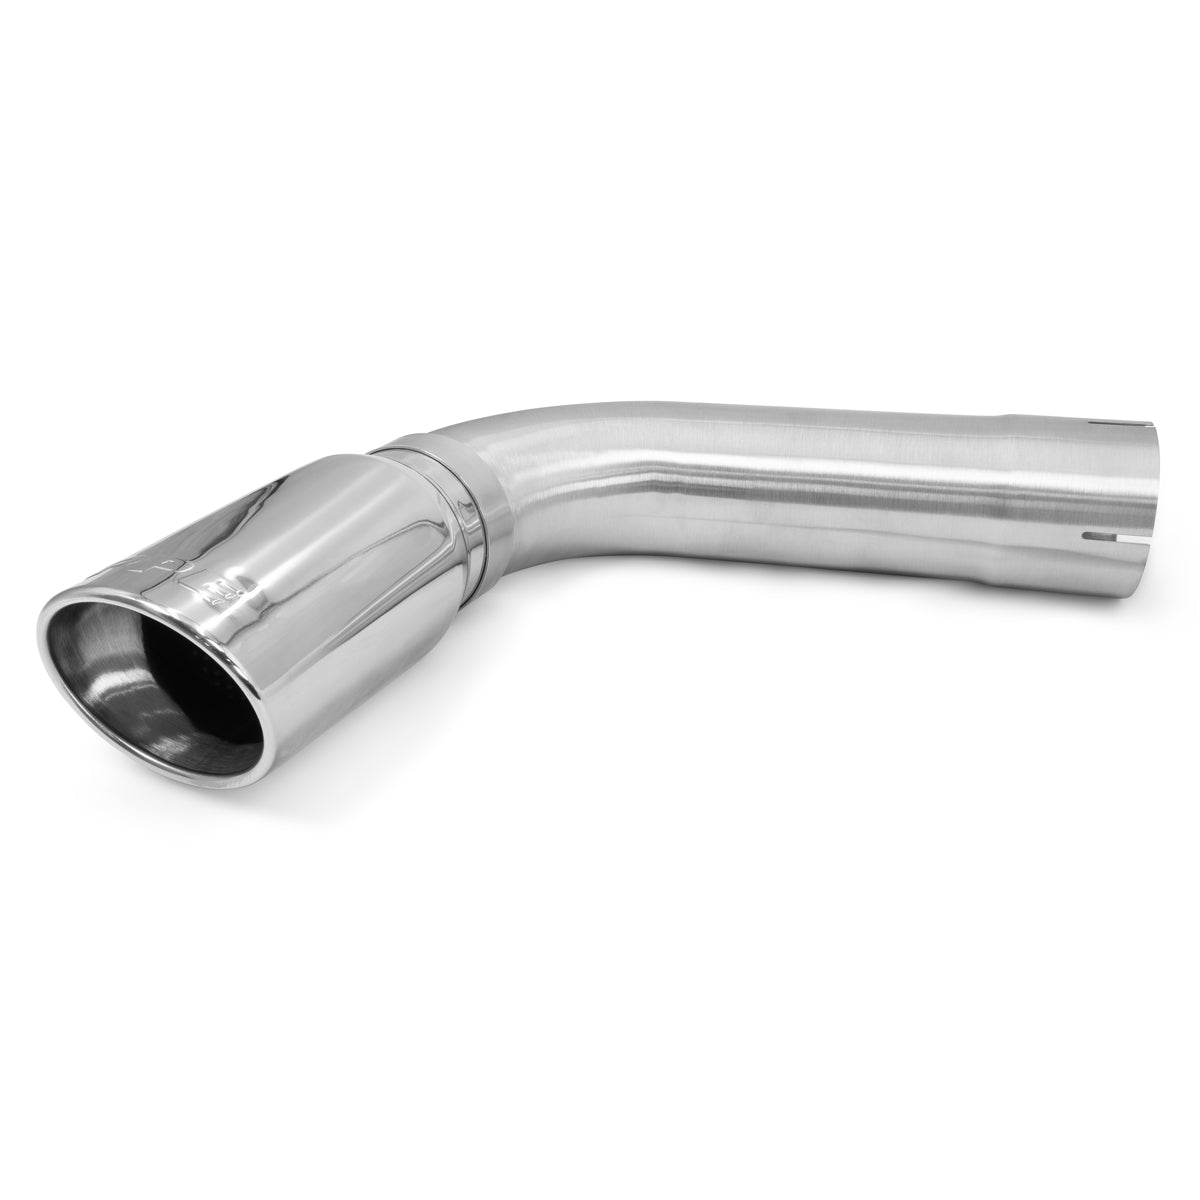 PPE Diesel 2020+ GM 6.6L Duramax 304 Stainless Steel Four Inch Performance Exhaust Upgrade Polished 117020200